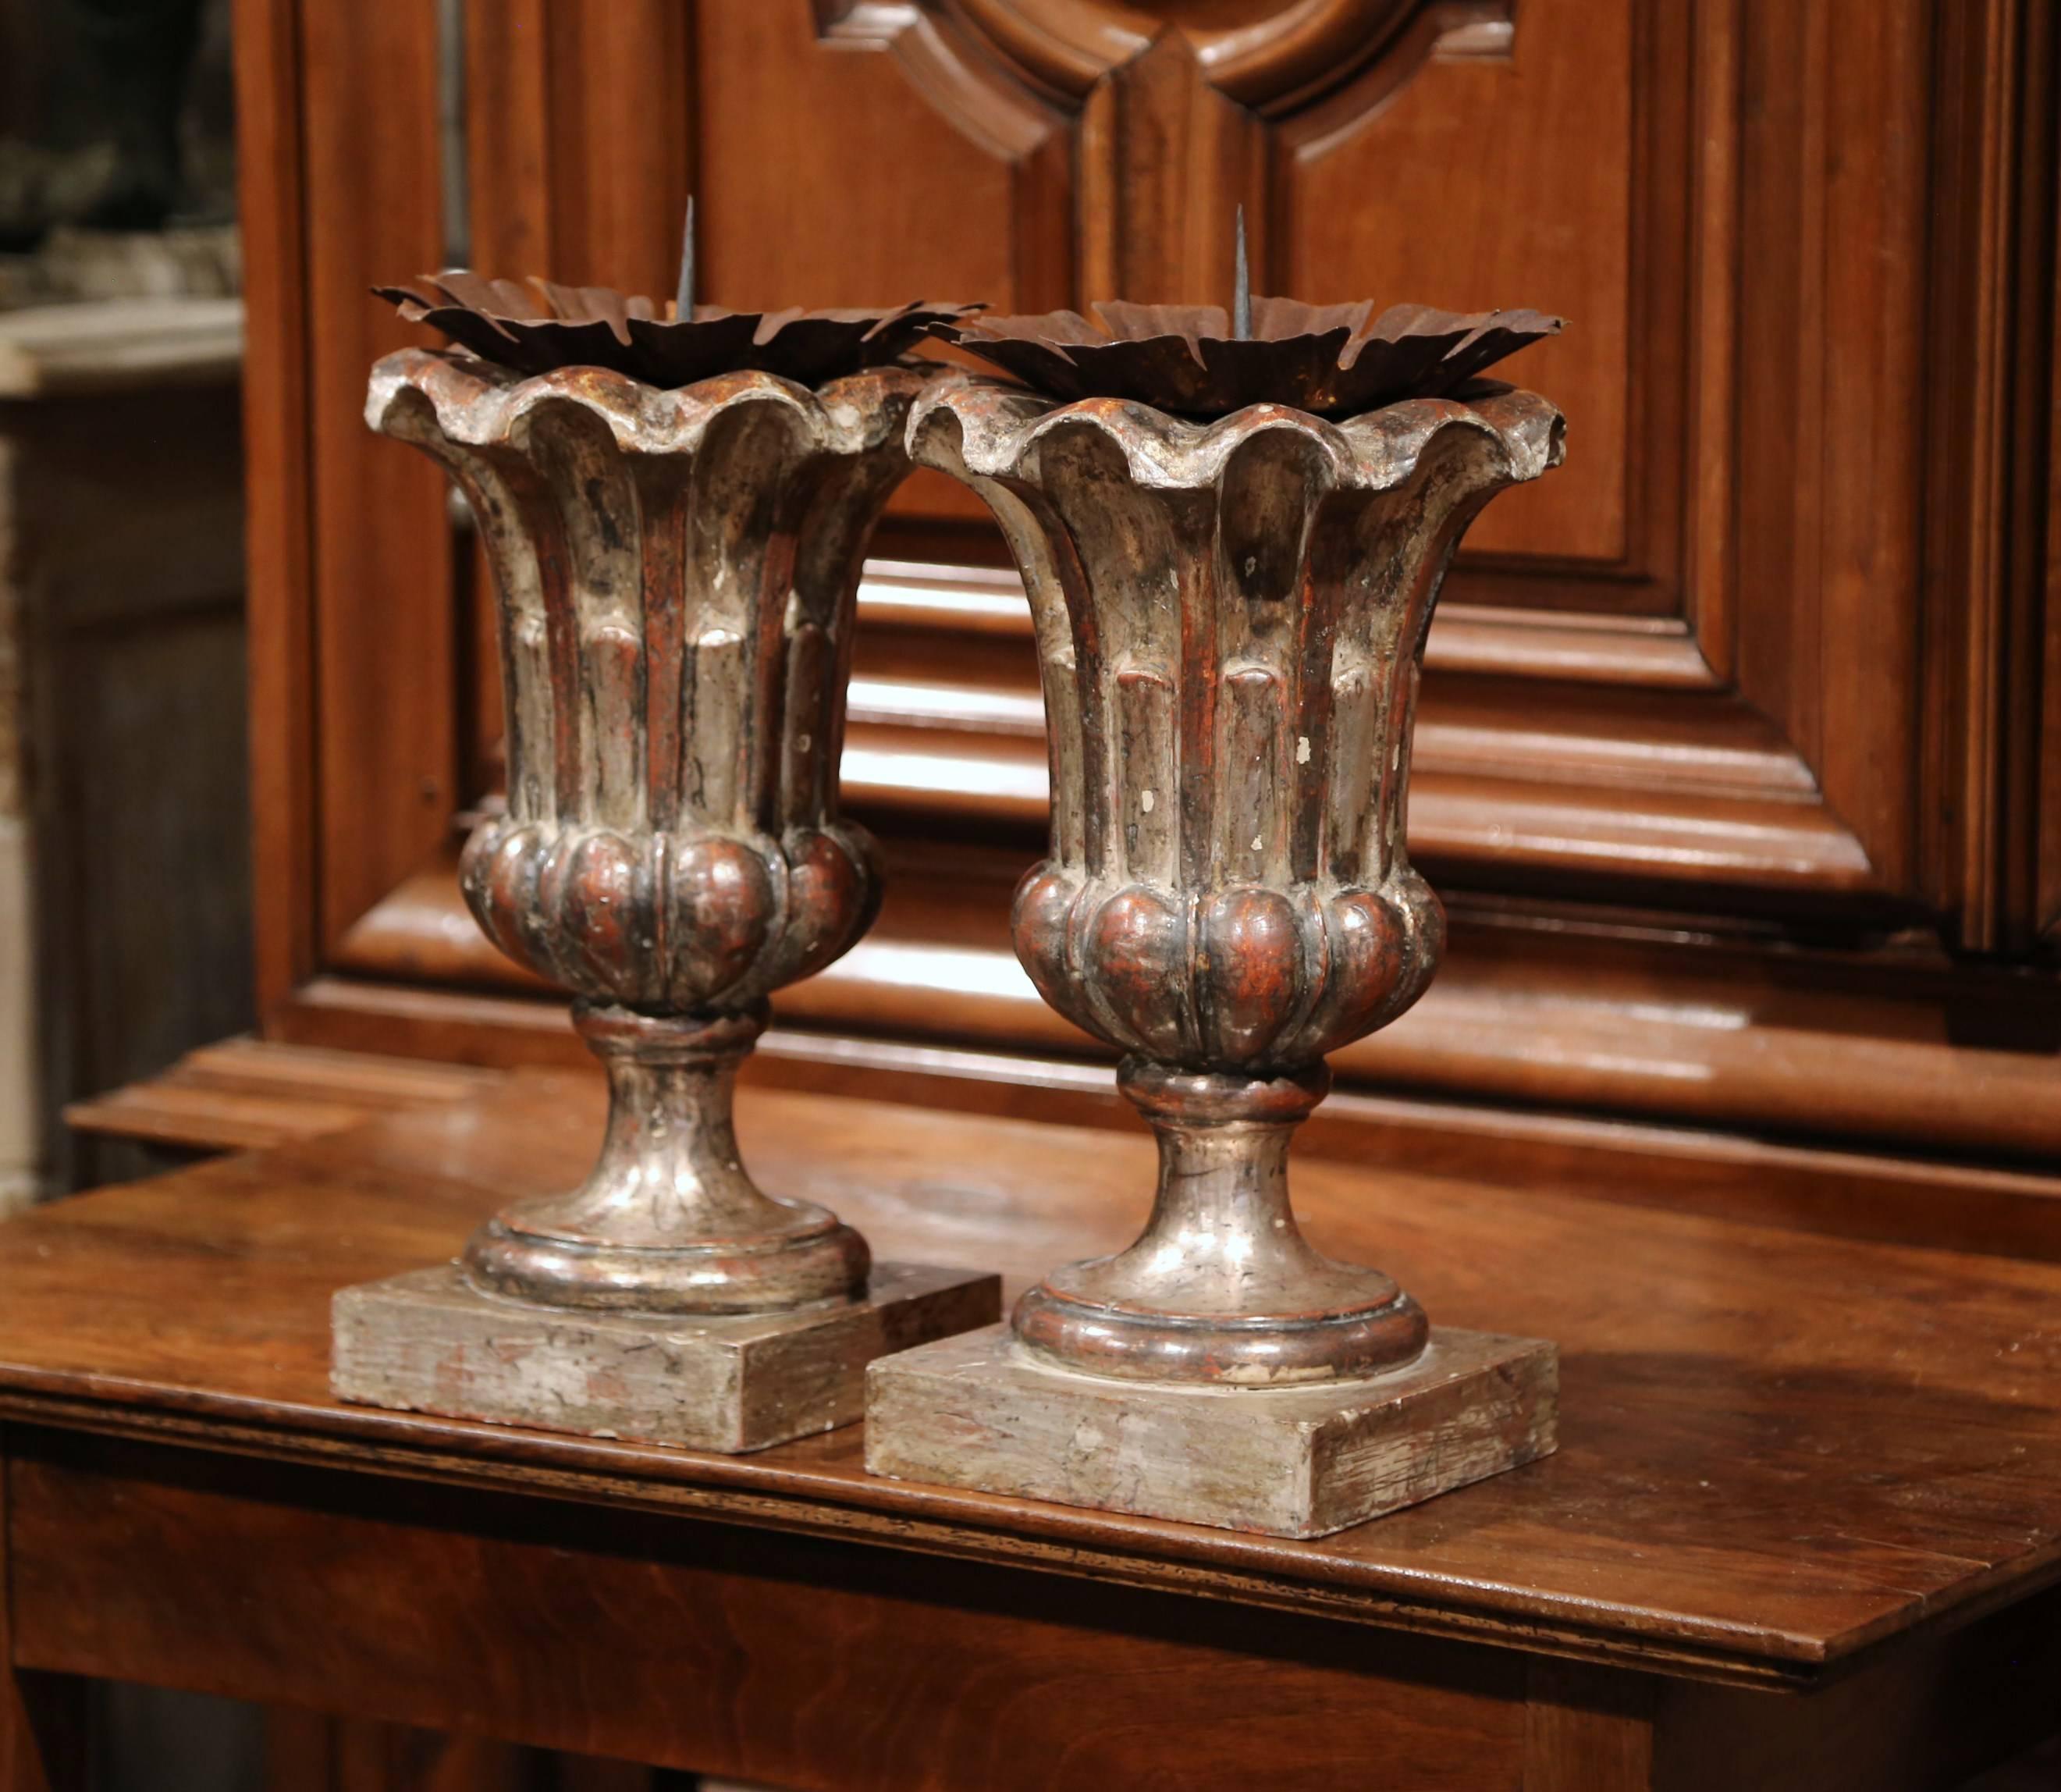 This elegant pair of ornate candlesticks were carved in Italy. Both pieces have a dramatic, Baroque shape and are coated with a metallic silver leaf finish. These prickets have metal plates to catch melting wax, and could also be mounted into